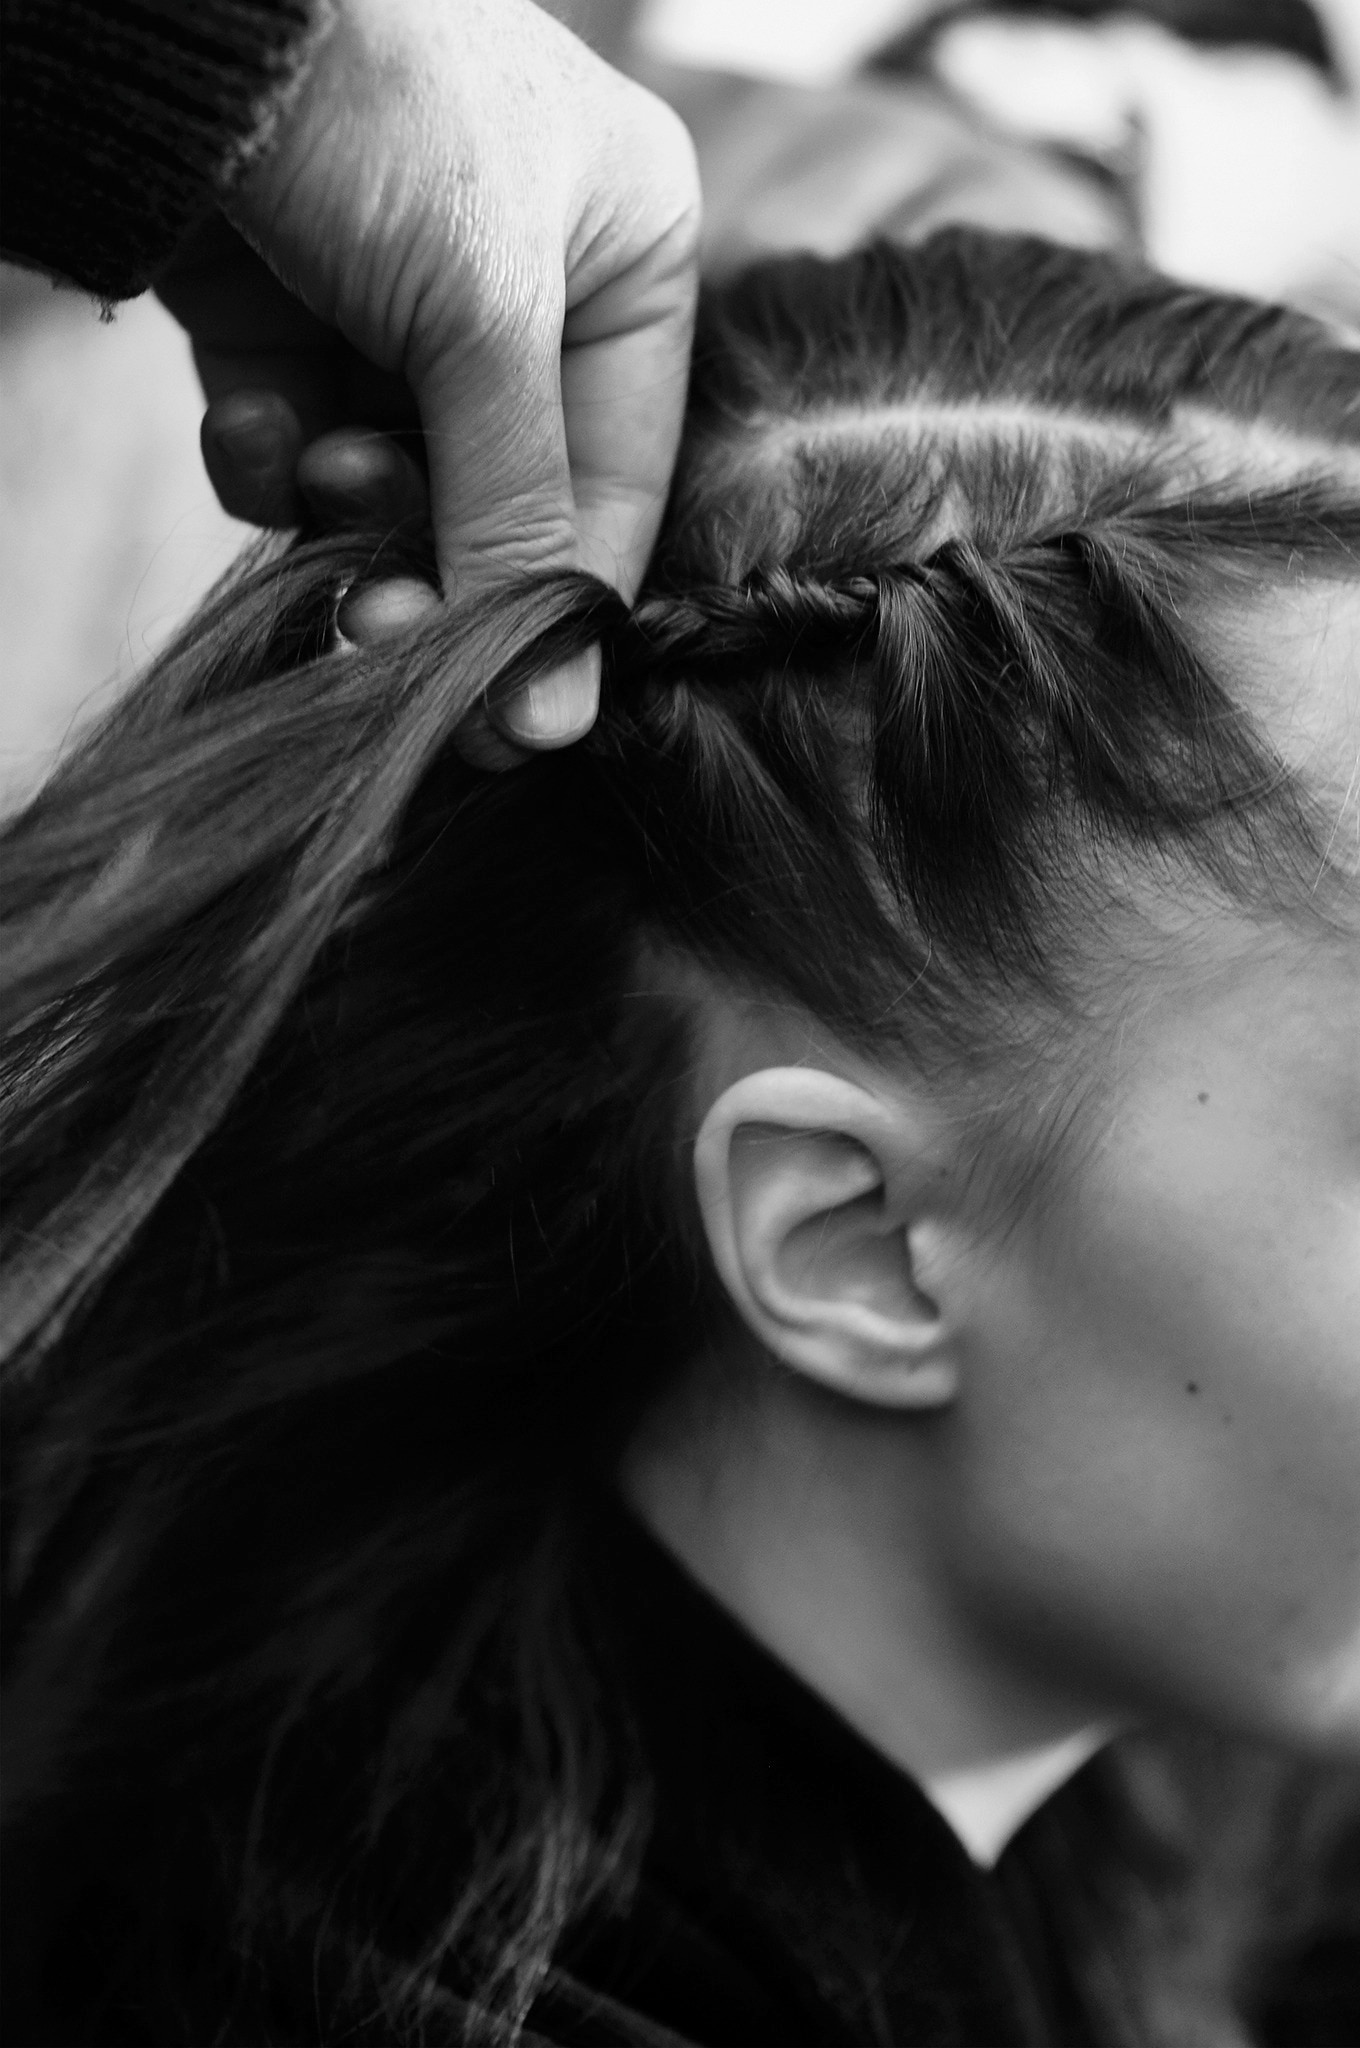 Someone's hands fastening a model's long, dark wavy hair into tight braids